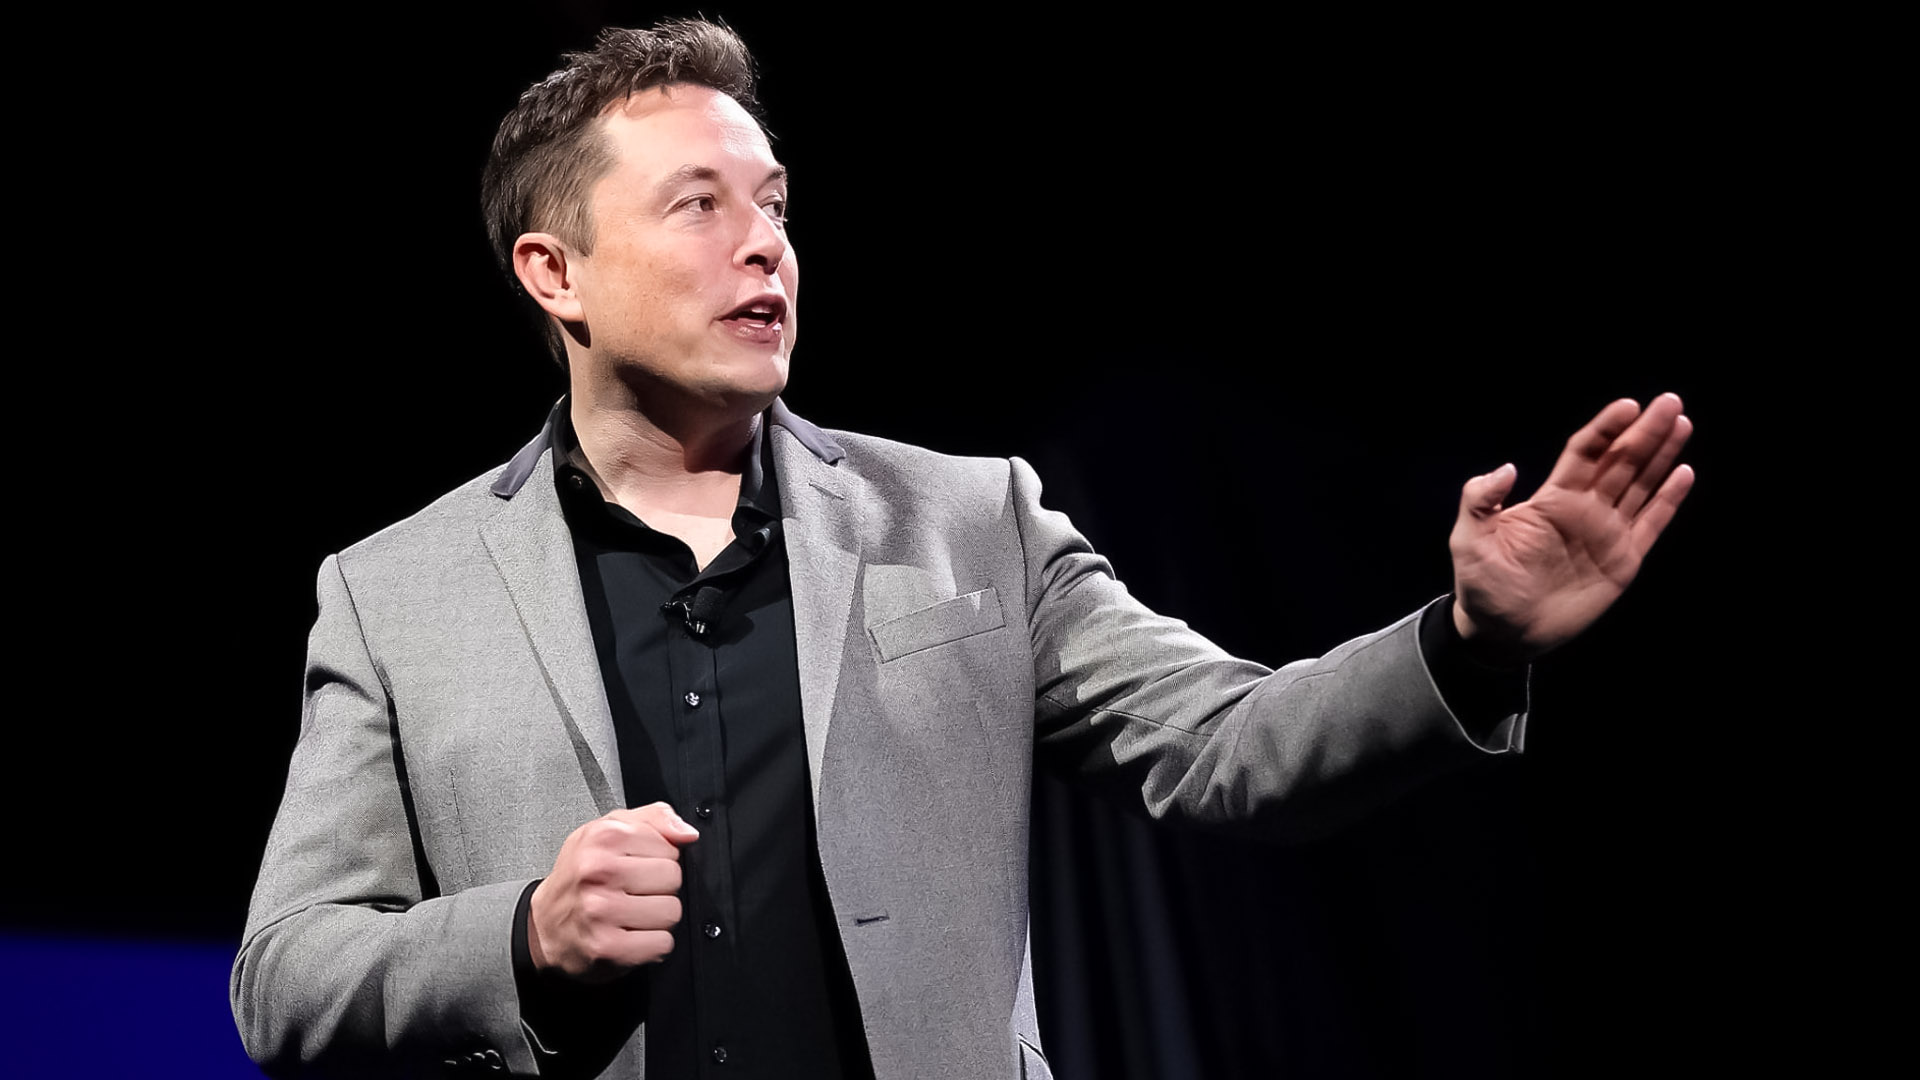 Musk loses $12 billion in a day after slamming S&P ESG rankings